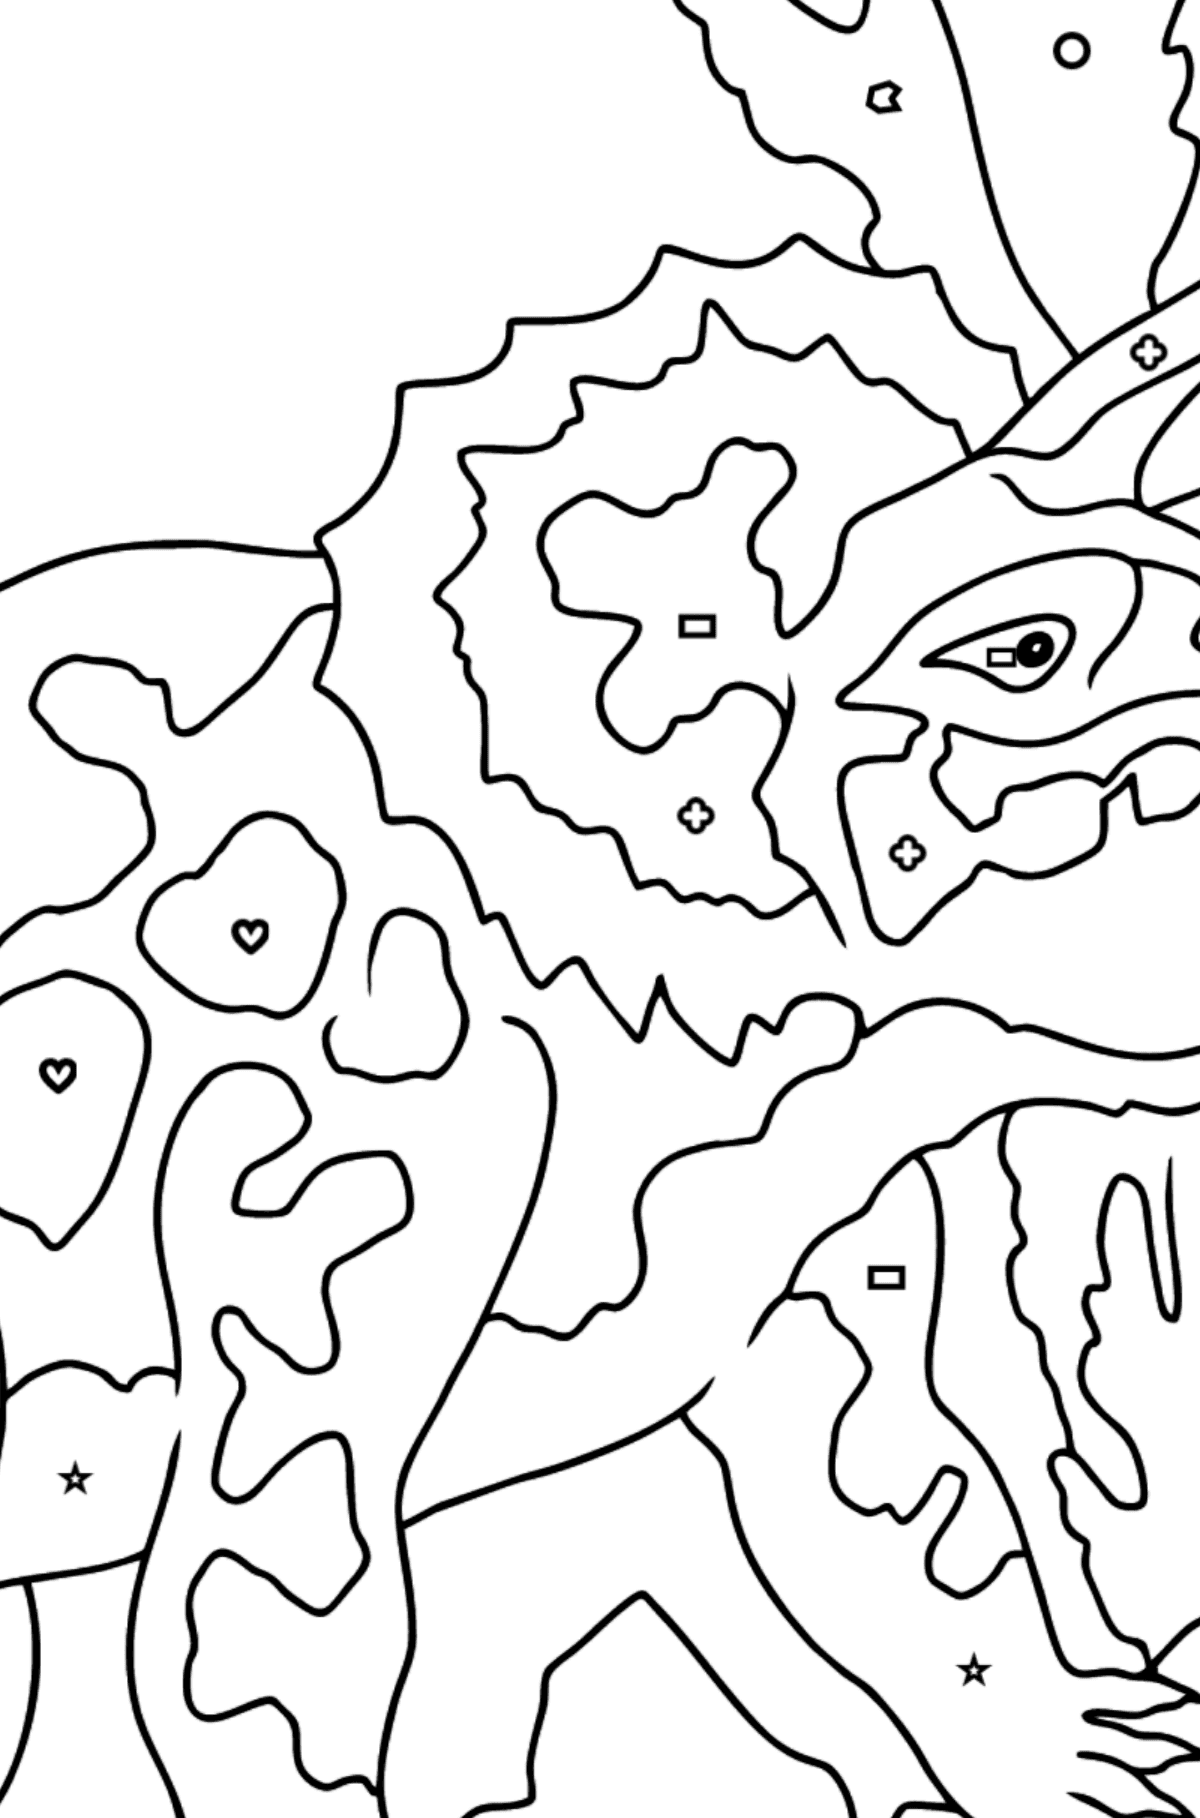 Coloring Page - Triceratops - A Peaceful Horned Dinosaur - Coloring by Geometric Shapes for Kids